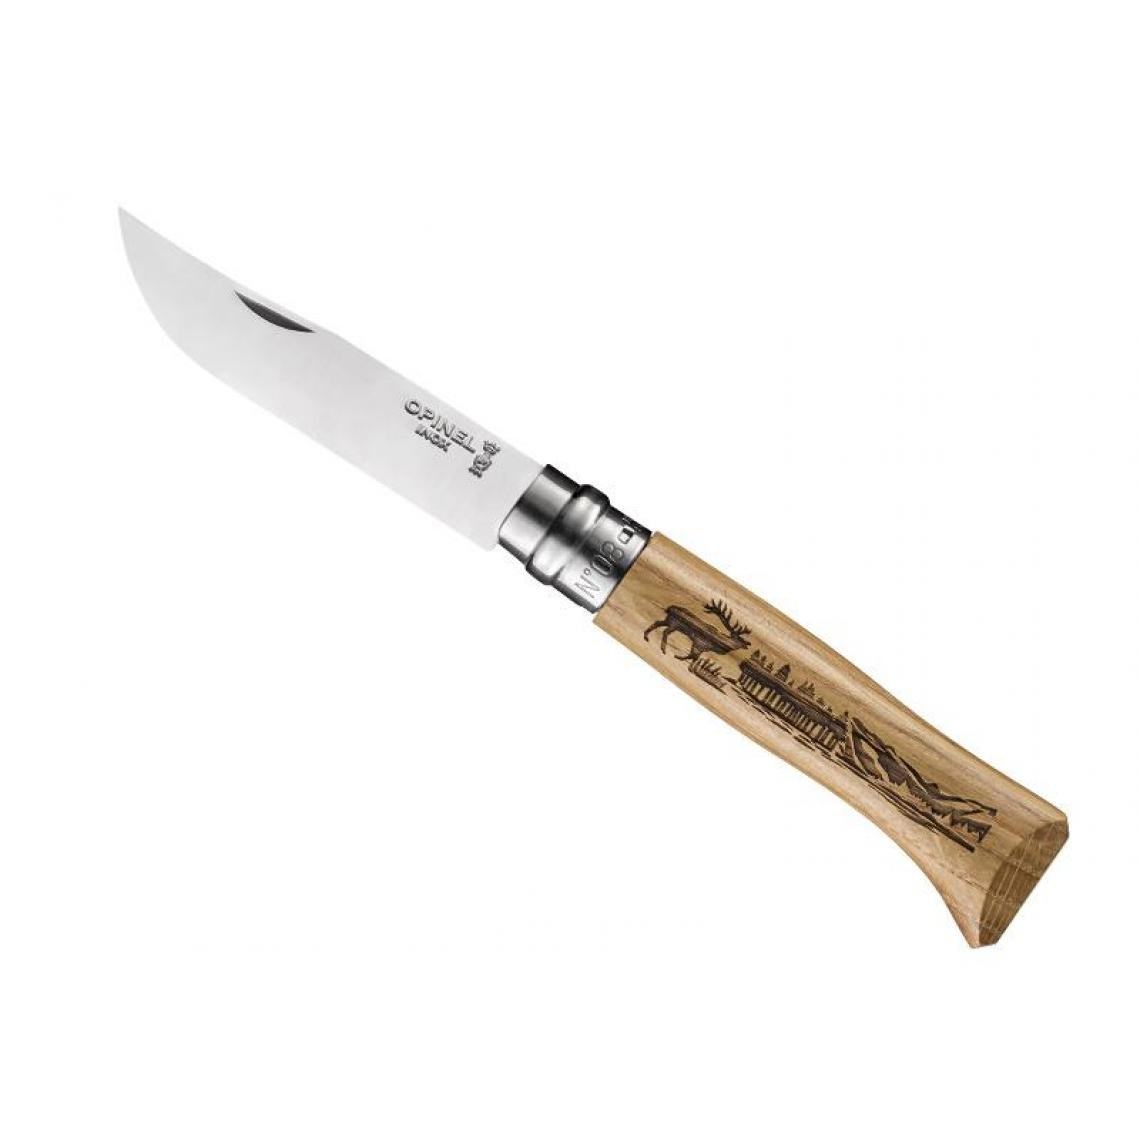 Opinel - OPINEL - 92332 - OPINEL ANIMALIA 3 CHENE 8 VRI CERF - Outils de coupe